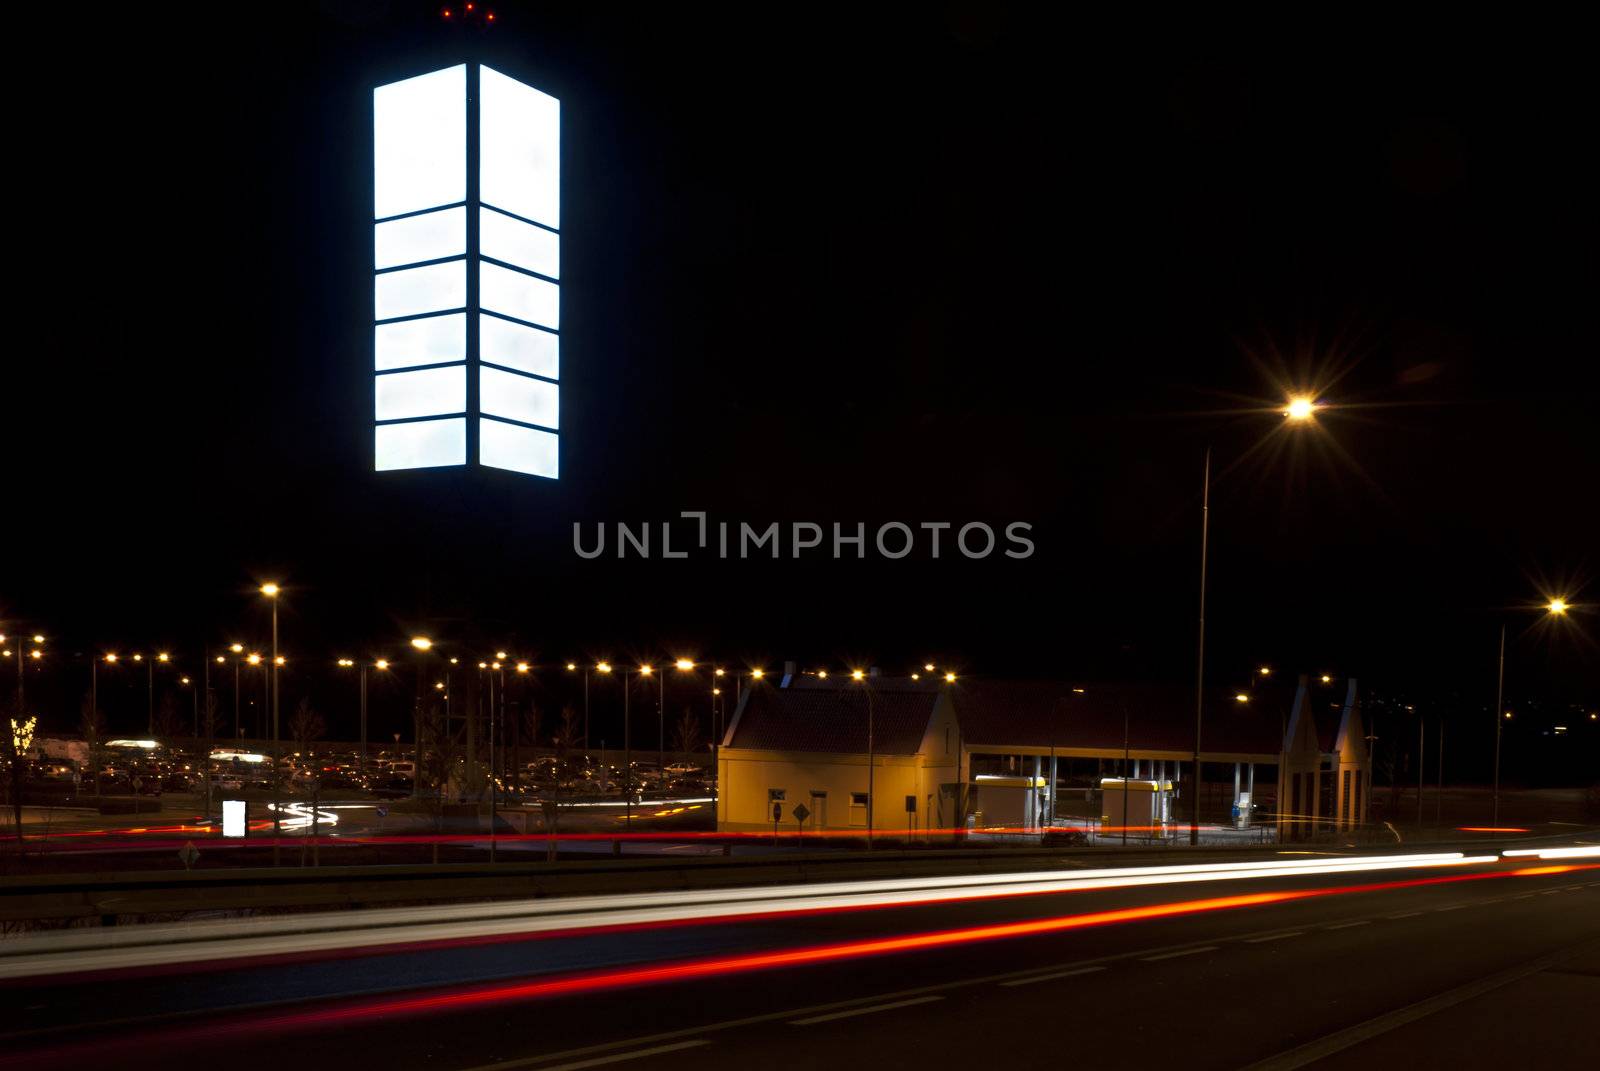 Night photo of empty billboard in the shopping park. Blurred lights of cars in the foreground.